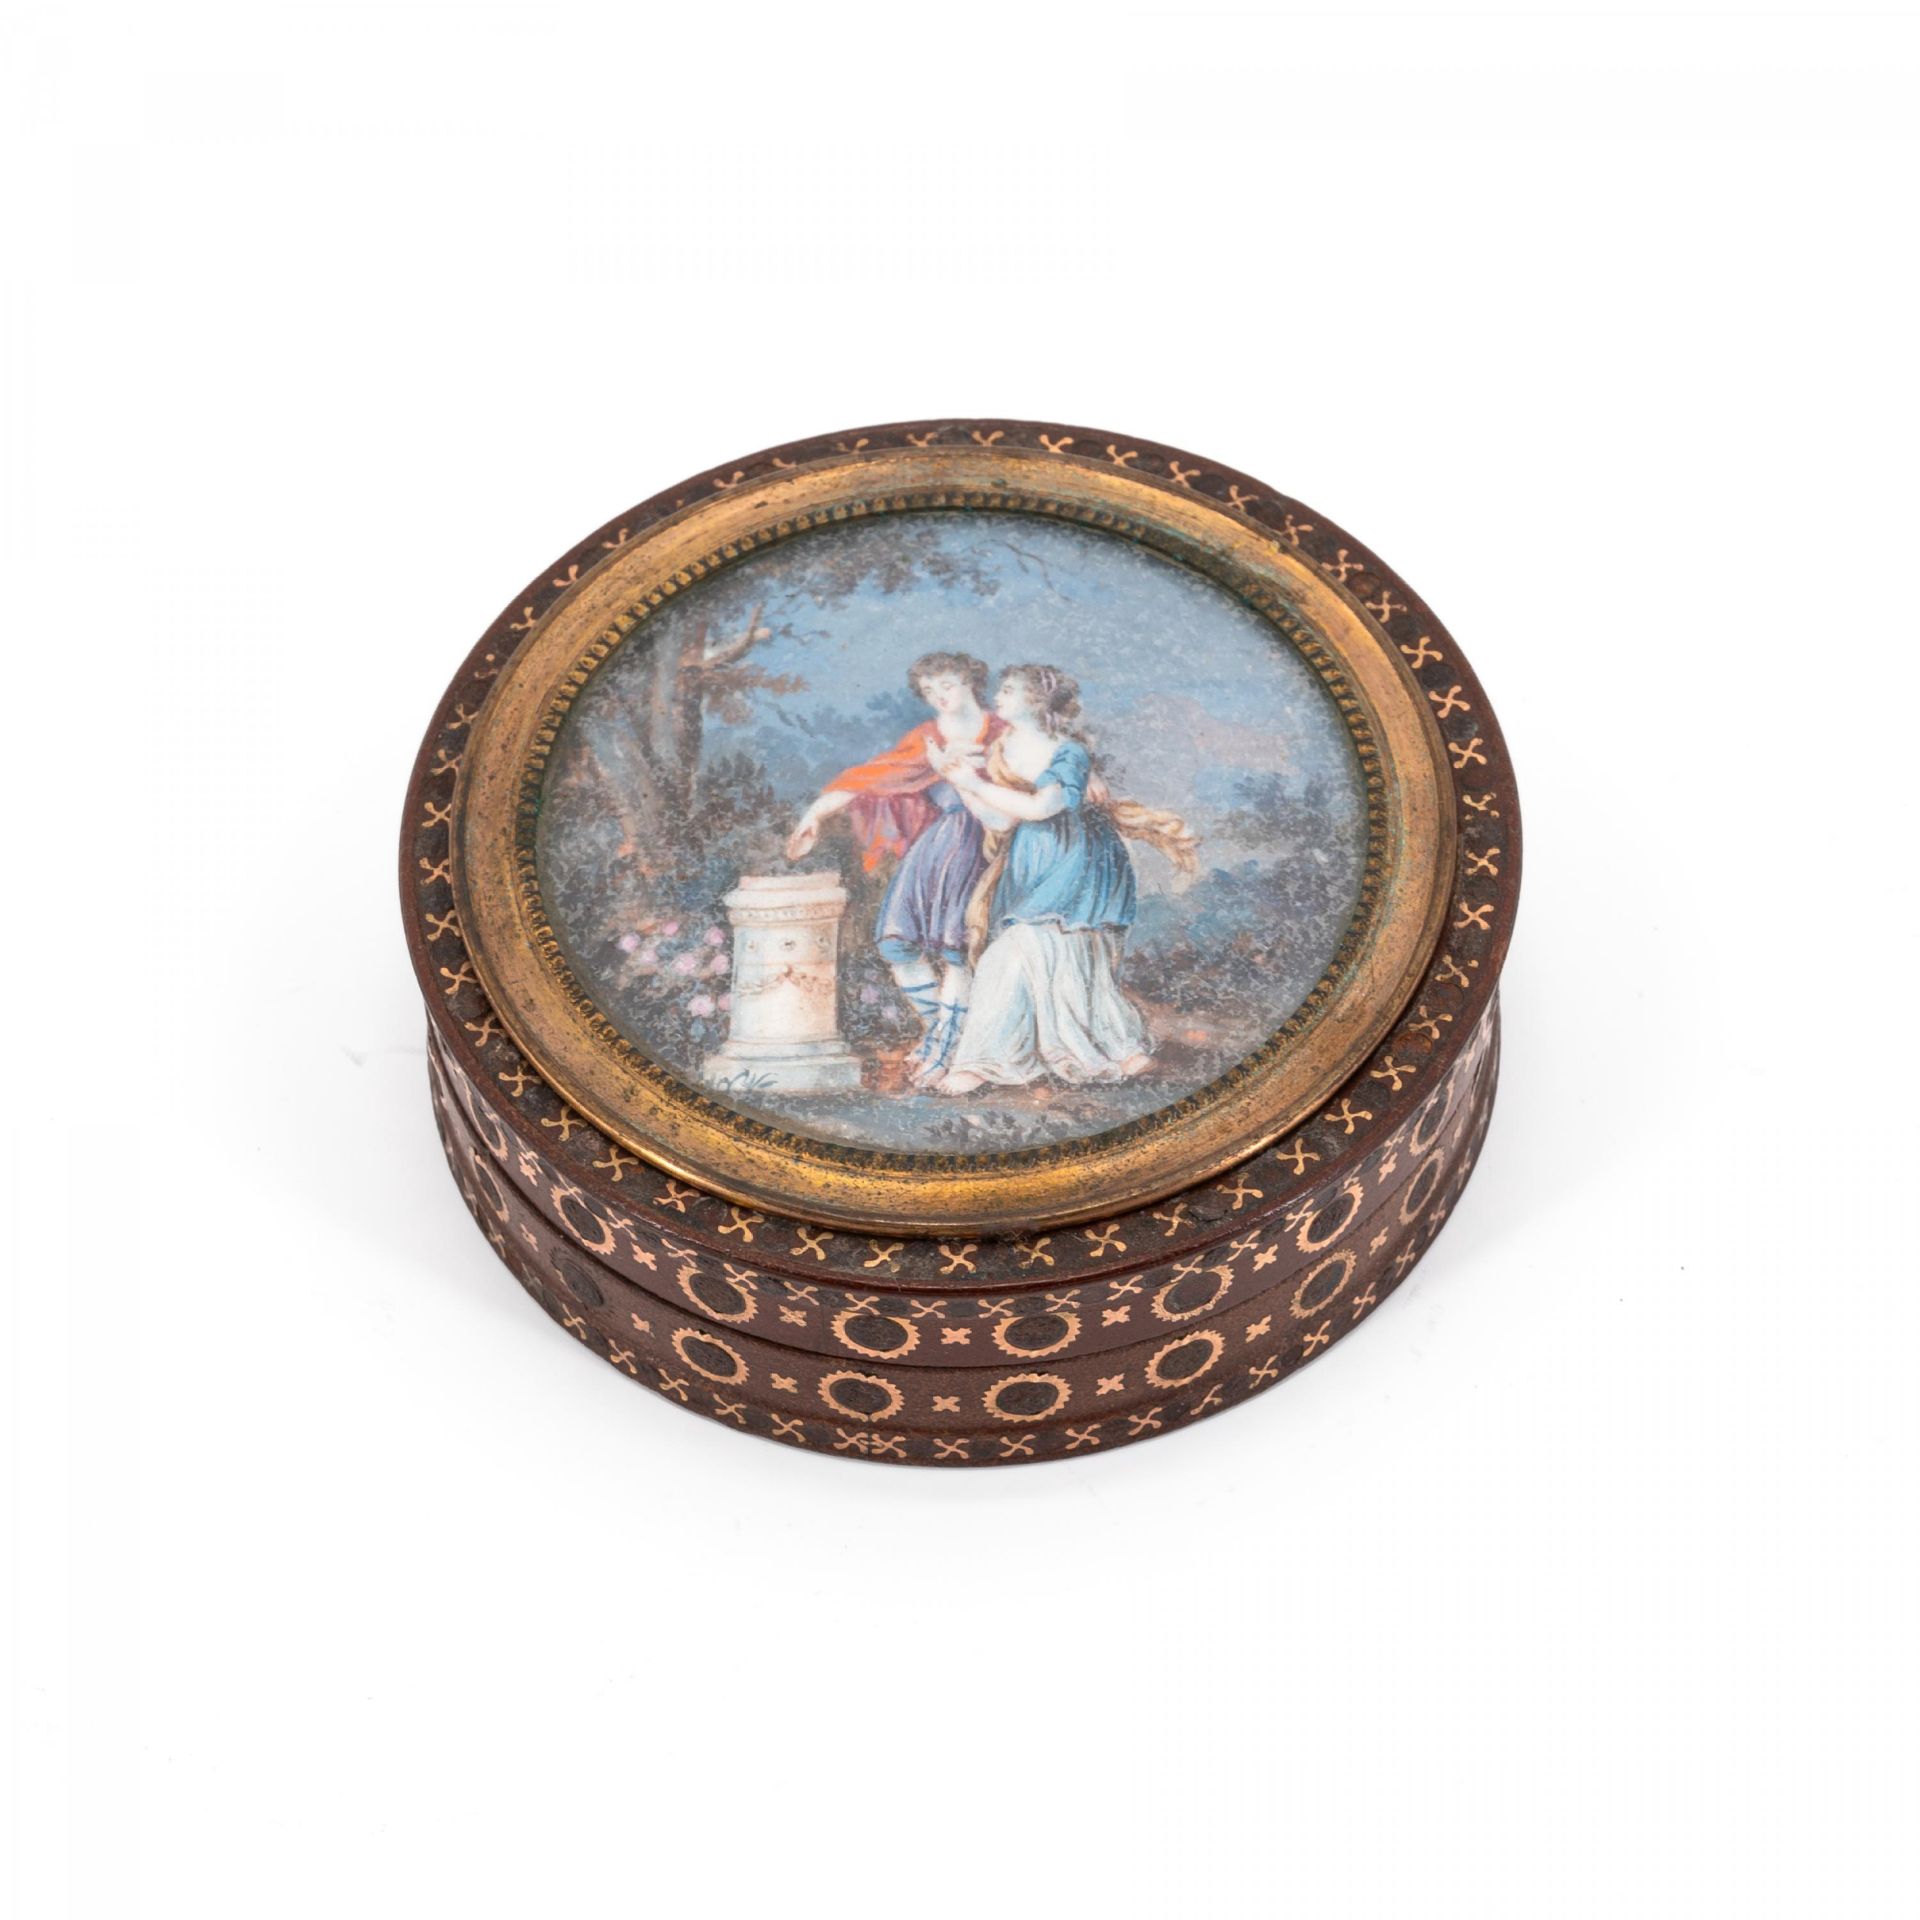 ROUND METAL BOX WITH COUPLE IN PARK LANDSCAPE